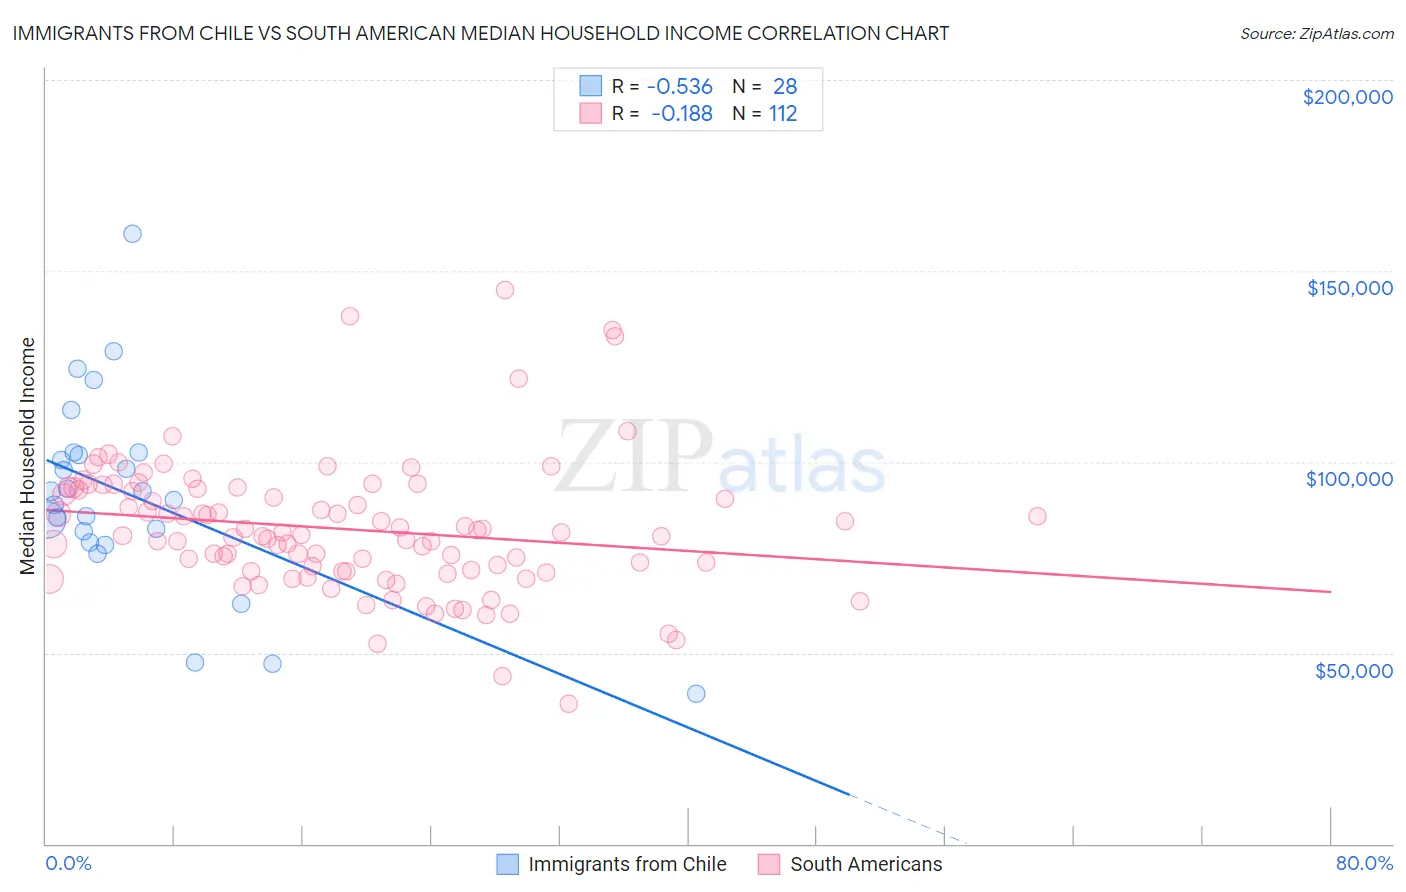 Immigrants from Chile vs South American Median Household Income